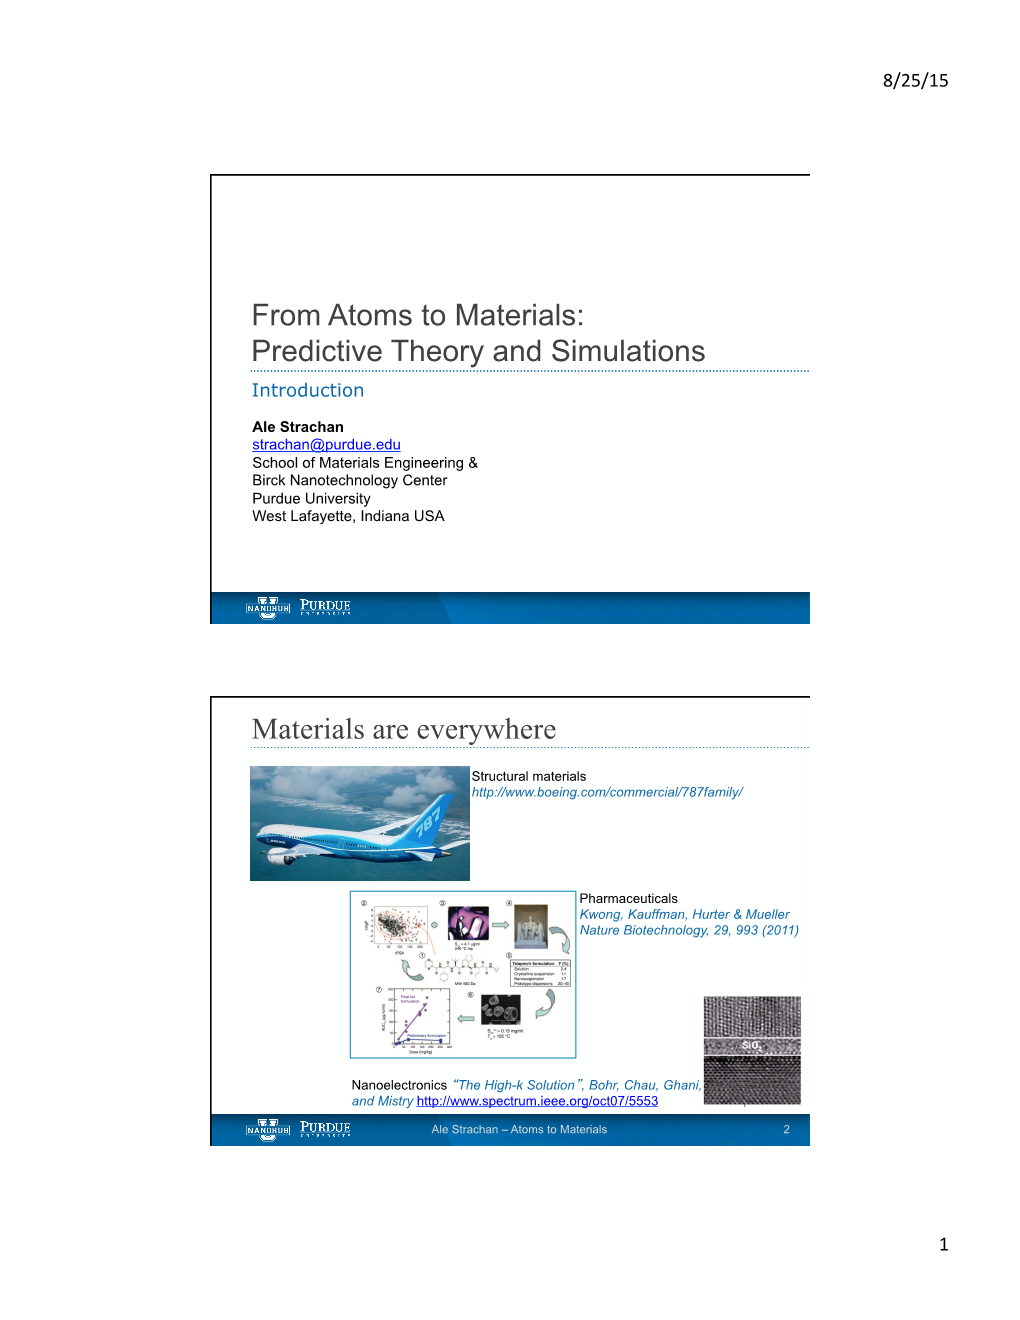 From Atoms to Materials: Predictive Theory and Simulations Materials Are Everywhere